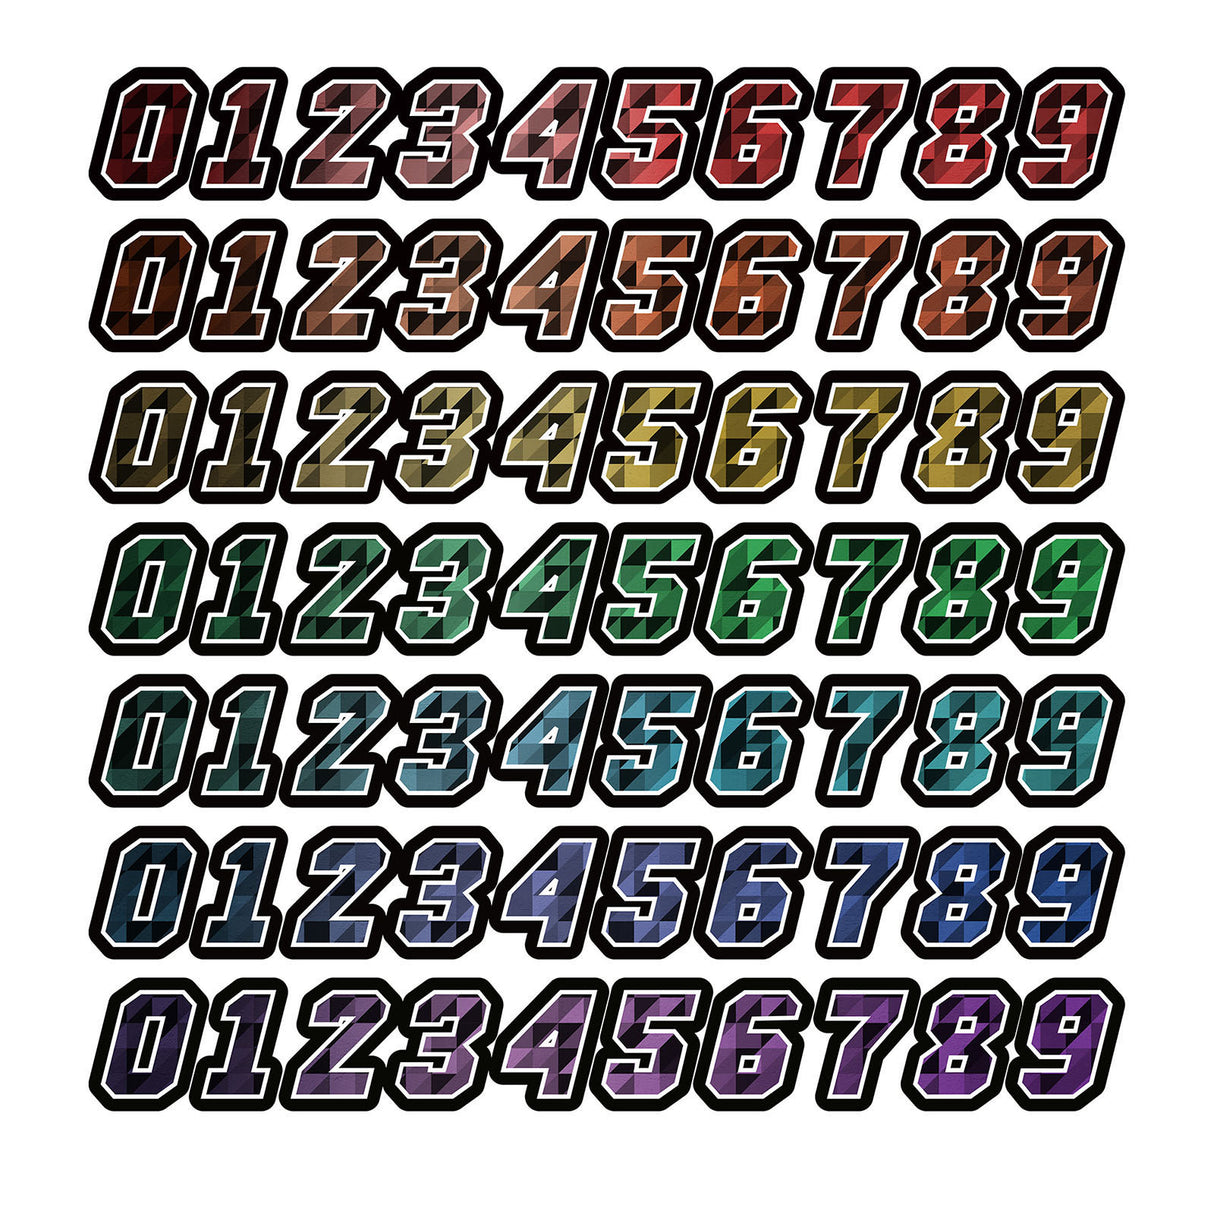 T08 Custom Racing Number Stickers Track Day Number Decals Rally Car Motocross Off-Road Bike - StickerBao Wheel Sticker Store